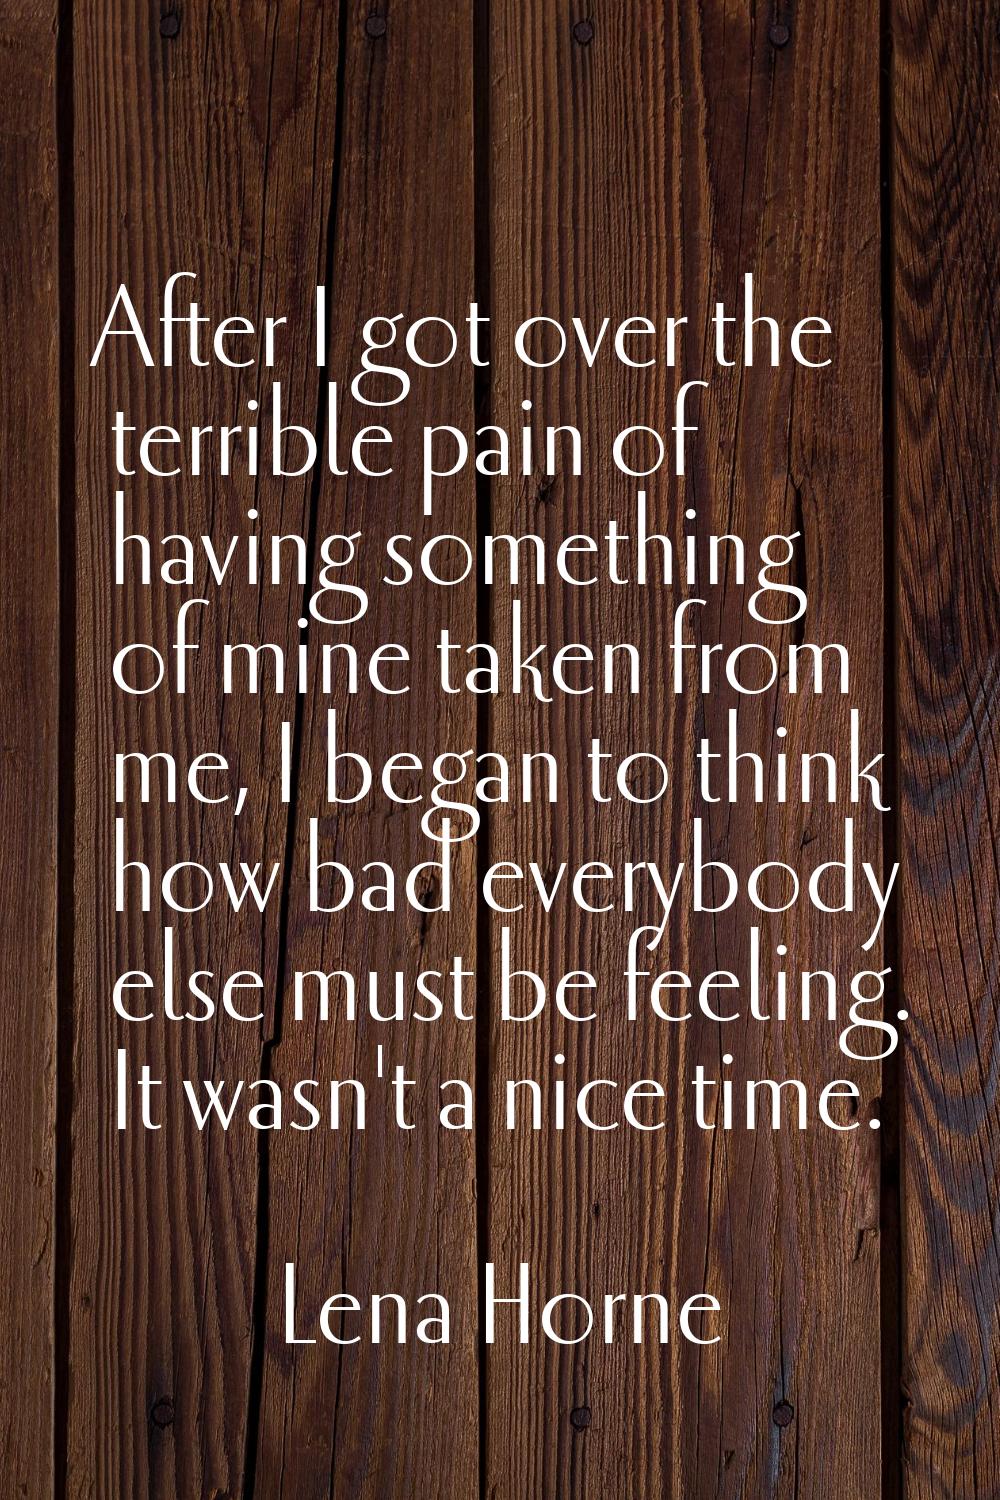 After I got over the terrible pain of having something of mine taken from me, I began to think how 